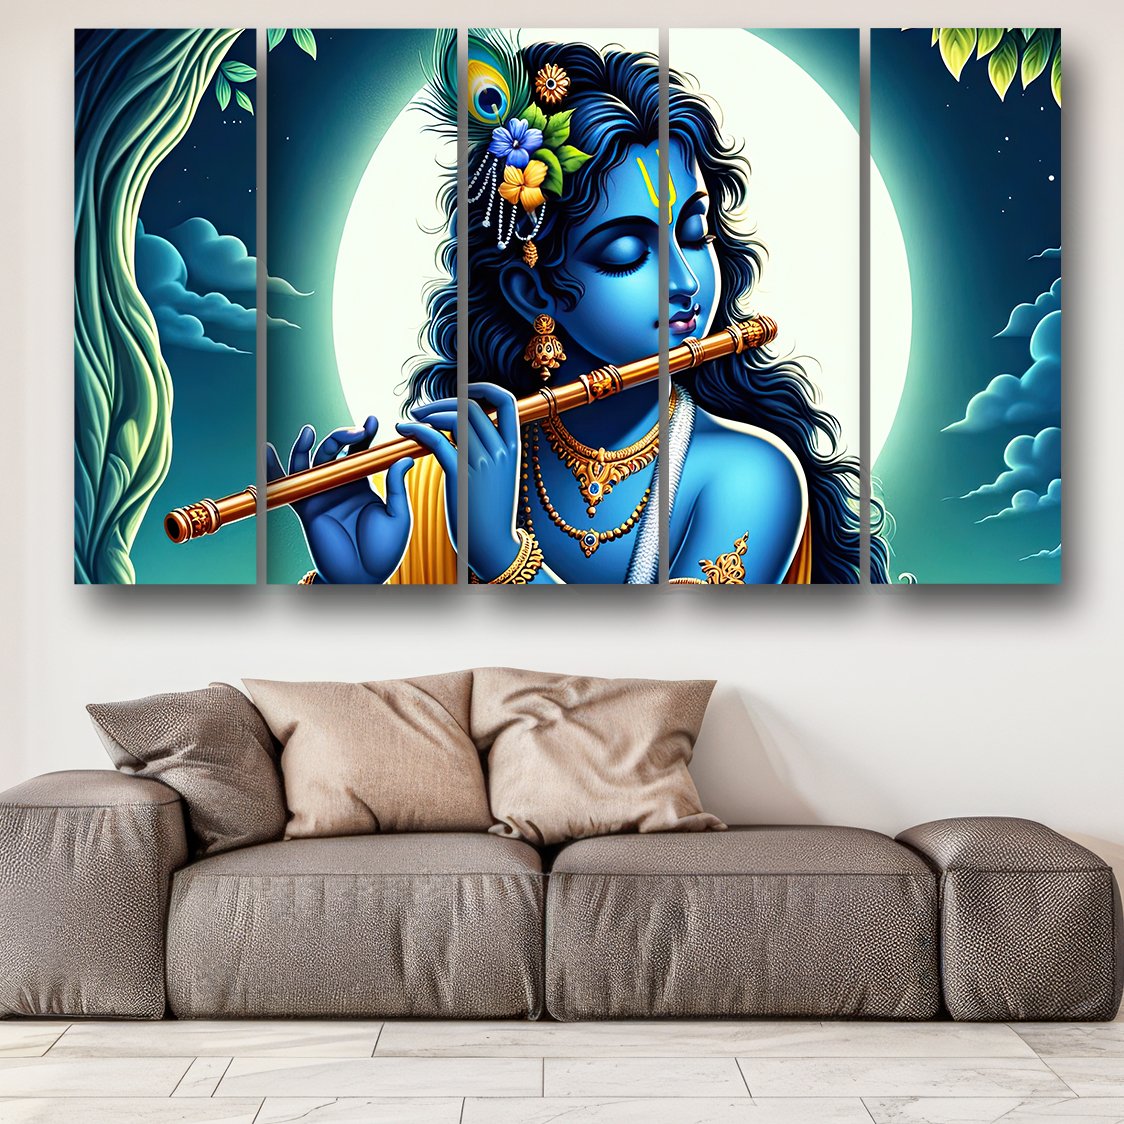 Casperme Lord Krishna Wall Painting For Living Room for Bedroom, Hotels & Office Decoration (48×30 inhes)